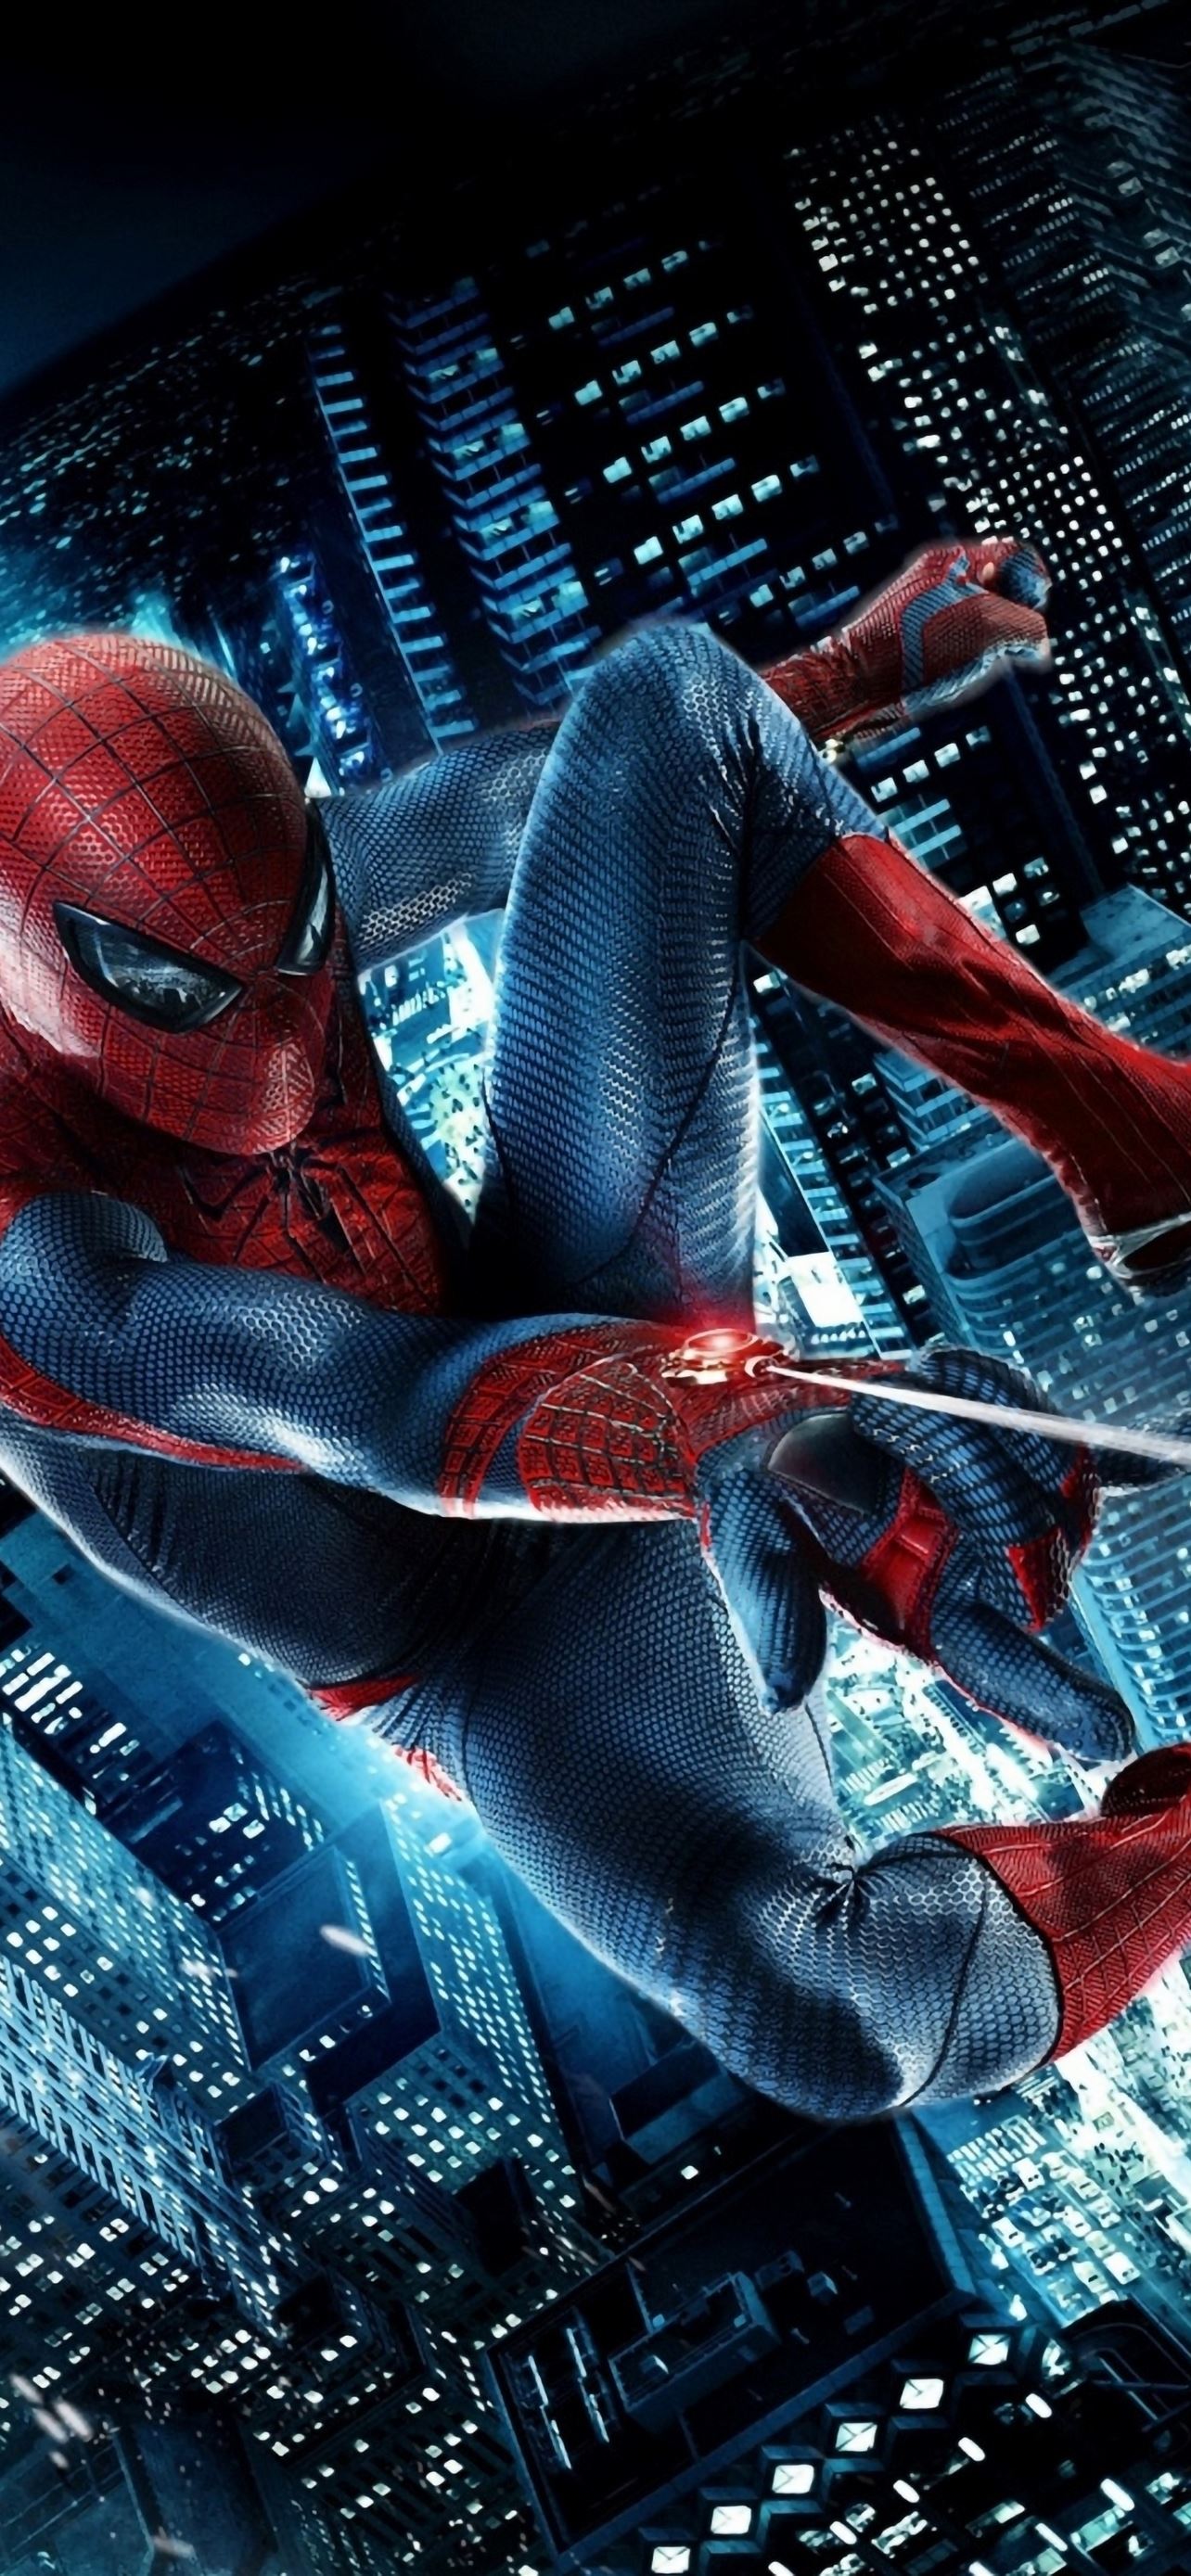 The Amazing Spiderman 2 iPhone Wallpapers Free Download